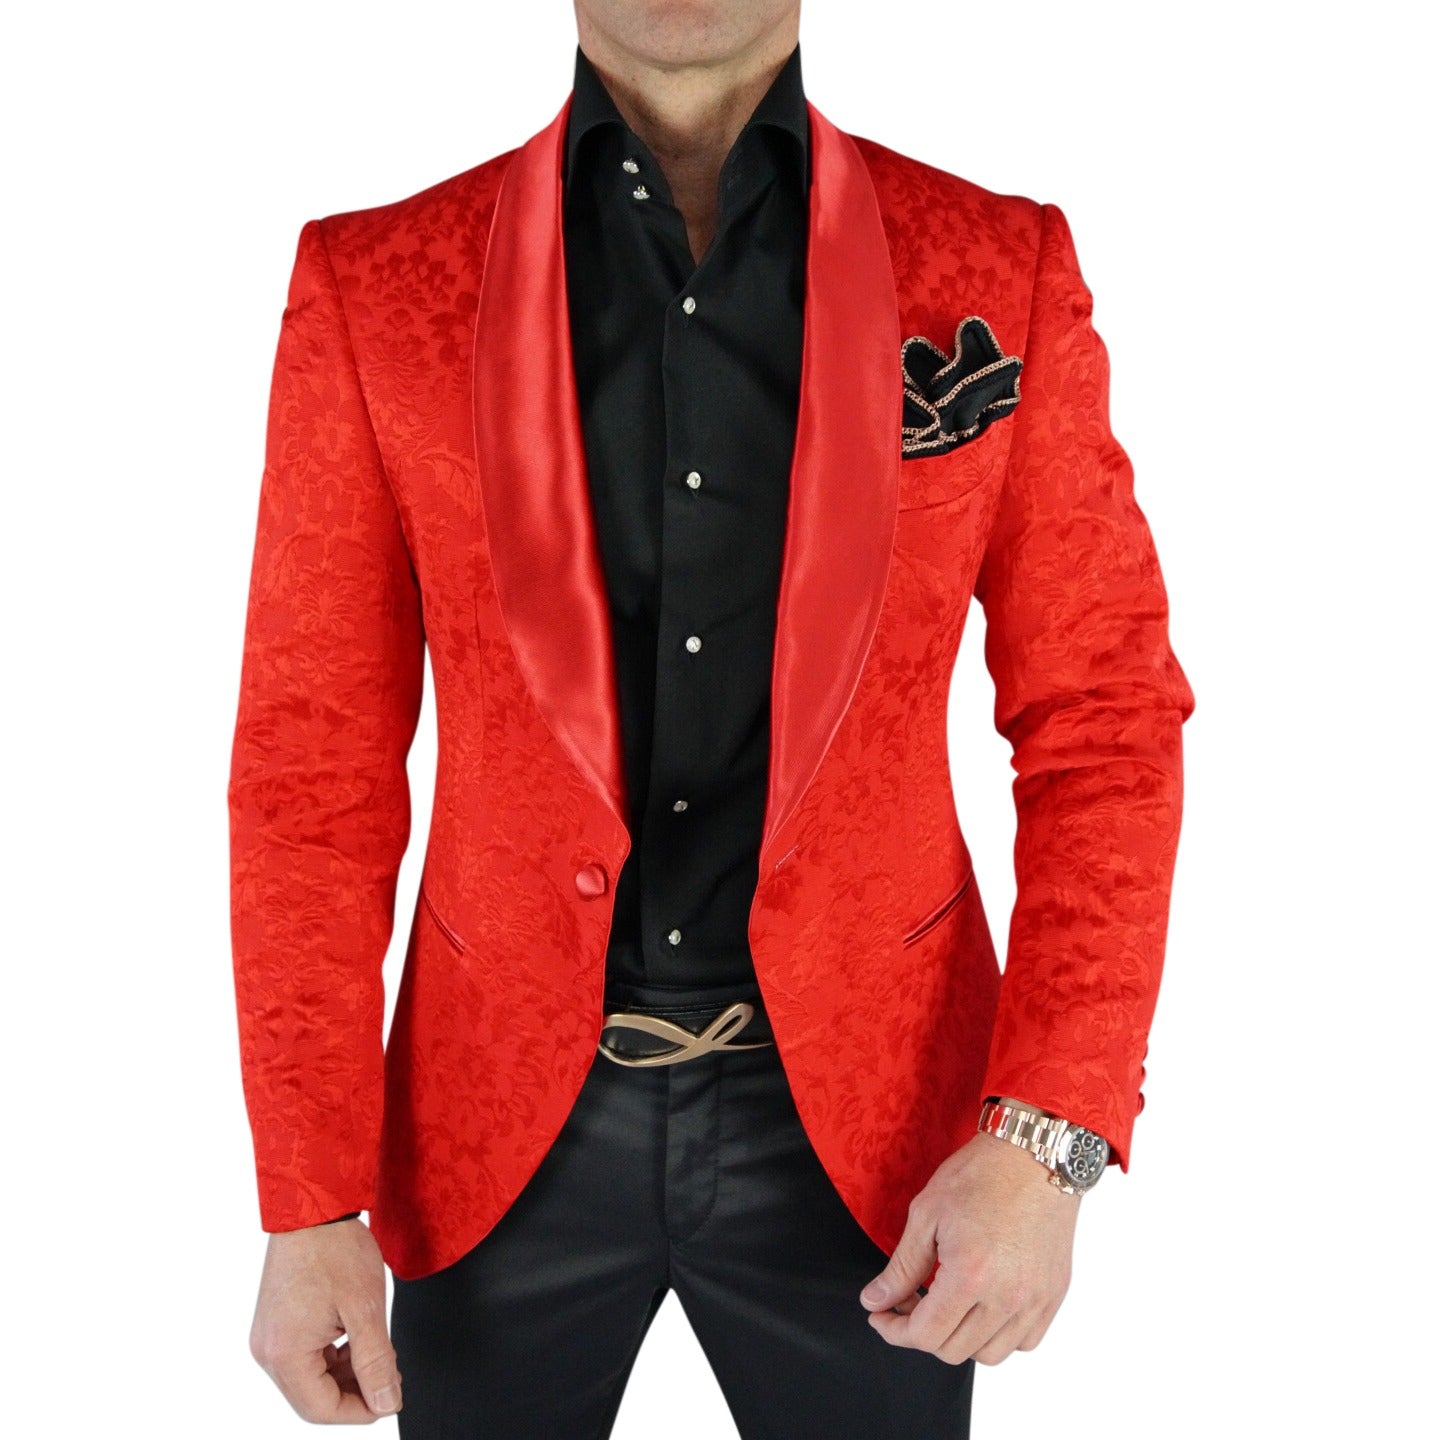 Red Fiore Dinner Jacket